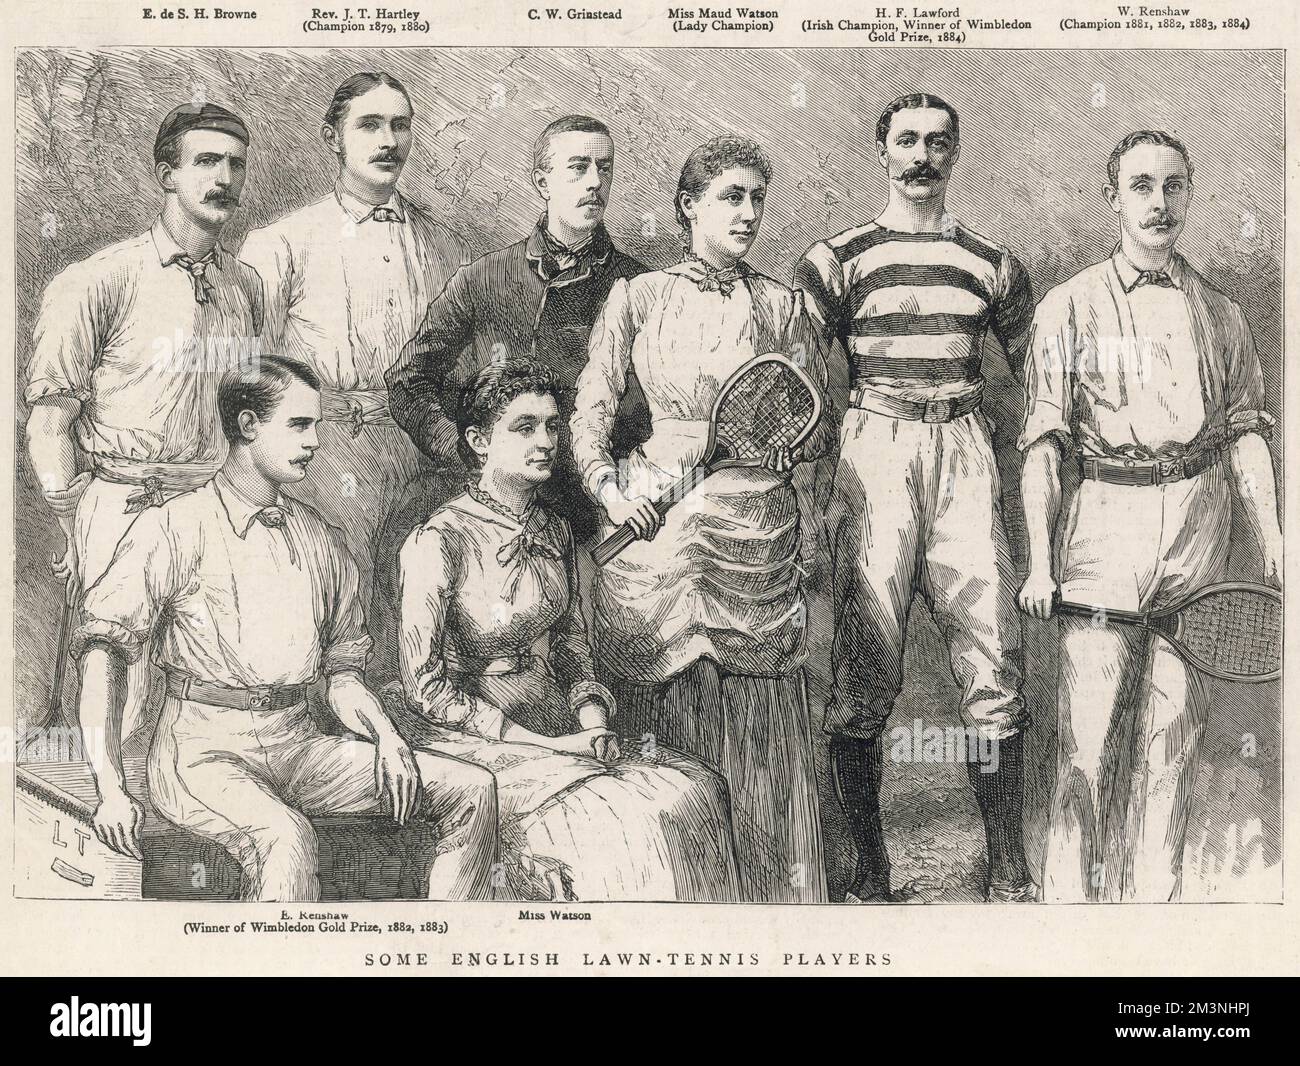 A group of English tennis players.  From left at top: E. d S. H. Browne, Rev. J. T. Hartley (Wimbledon Champion 1879, 1880), C. W. Grinstead, Miss Maud Watson (Lady Champion, 1884), H. F. Lawford (Irish Champion, Winner of the Wimbledon Gold Prize, 1884), W. Renshaw (Champion 1881, 1882, 1883, 1884).  From left along the bottom, E. Renshaw (Winner of Wimbledon Gold Prize, 1882, 1883) and Miss Lillian Watson (sister of Maud and runner-up in 1884).     Date: 1884 Stock Photo